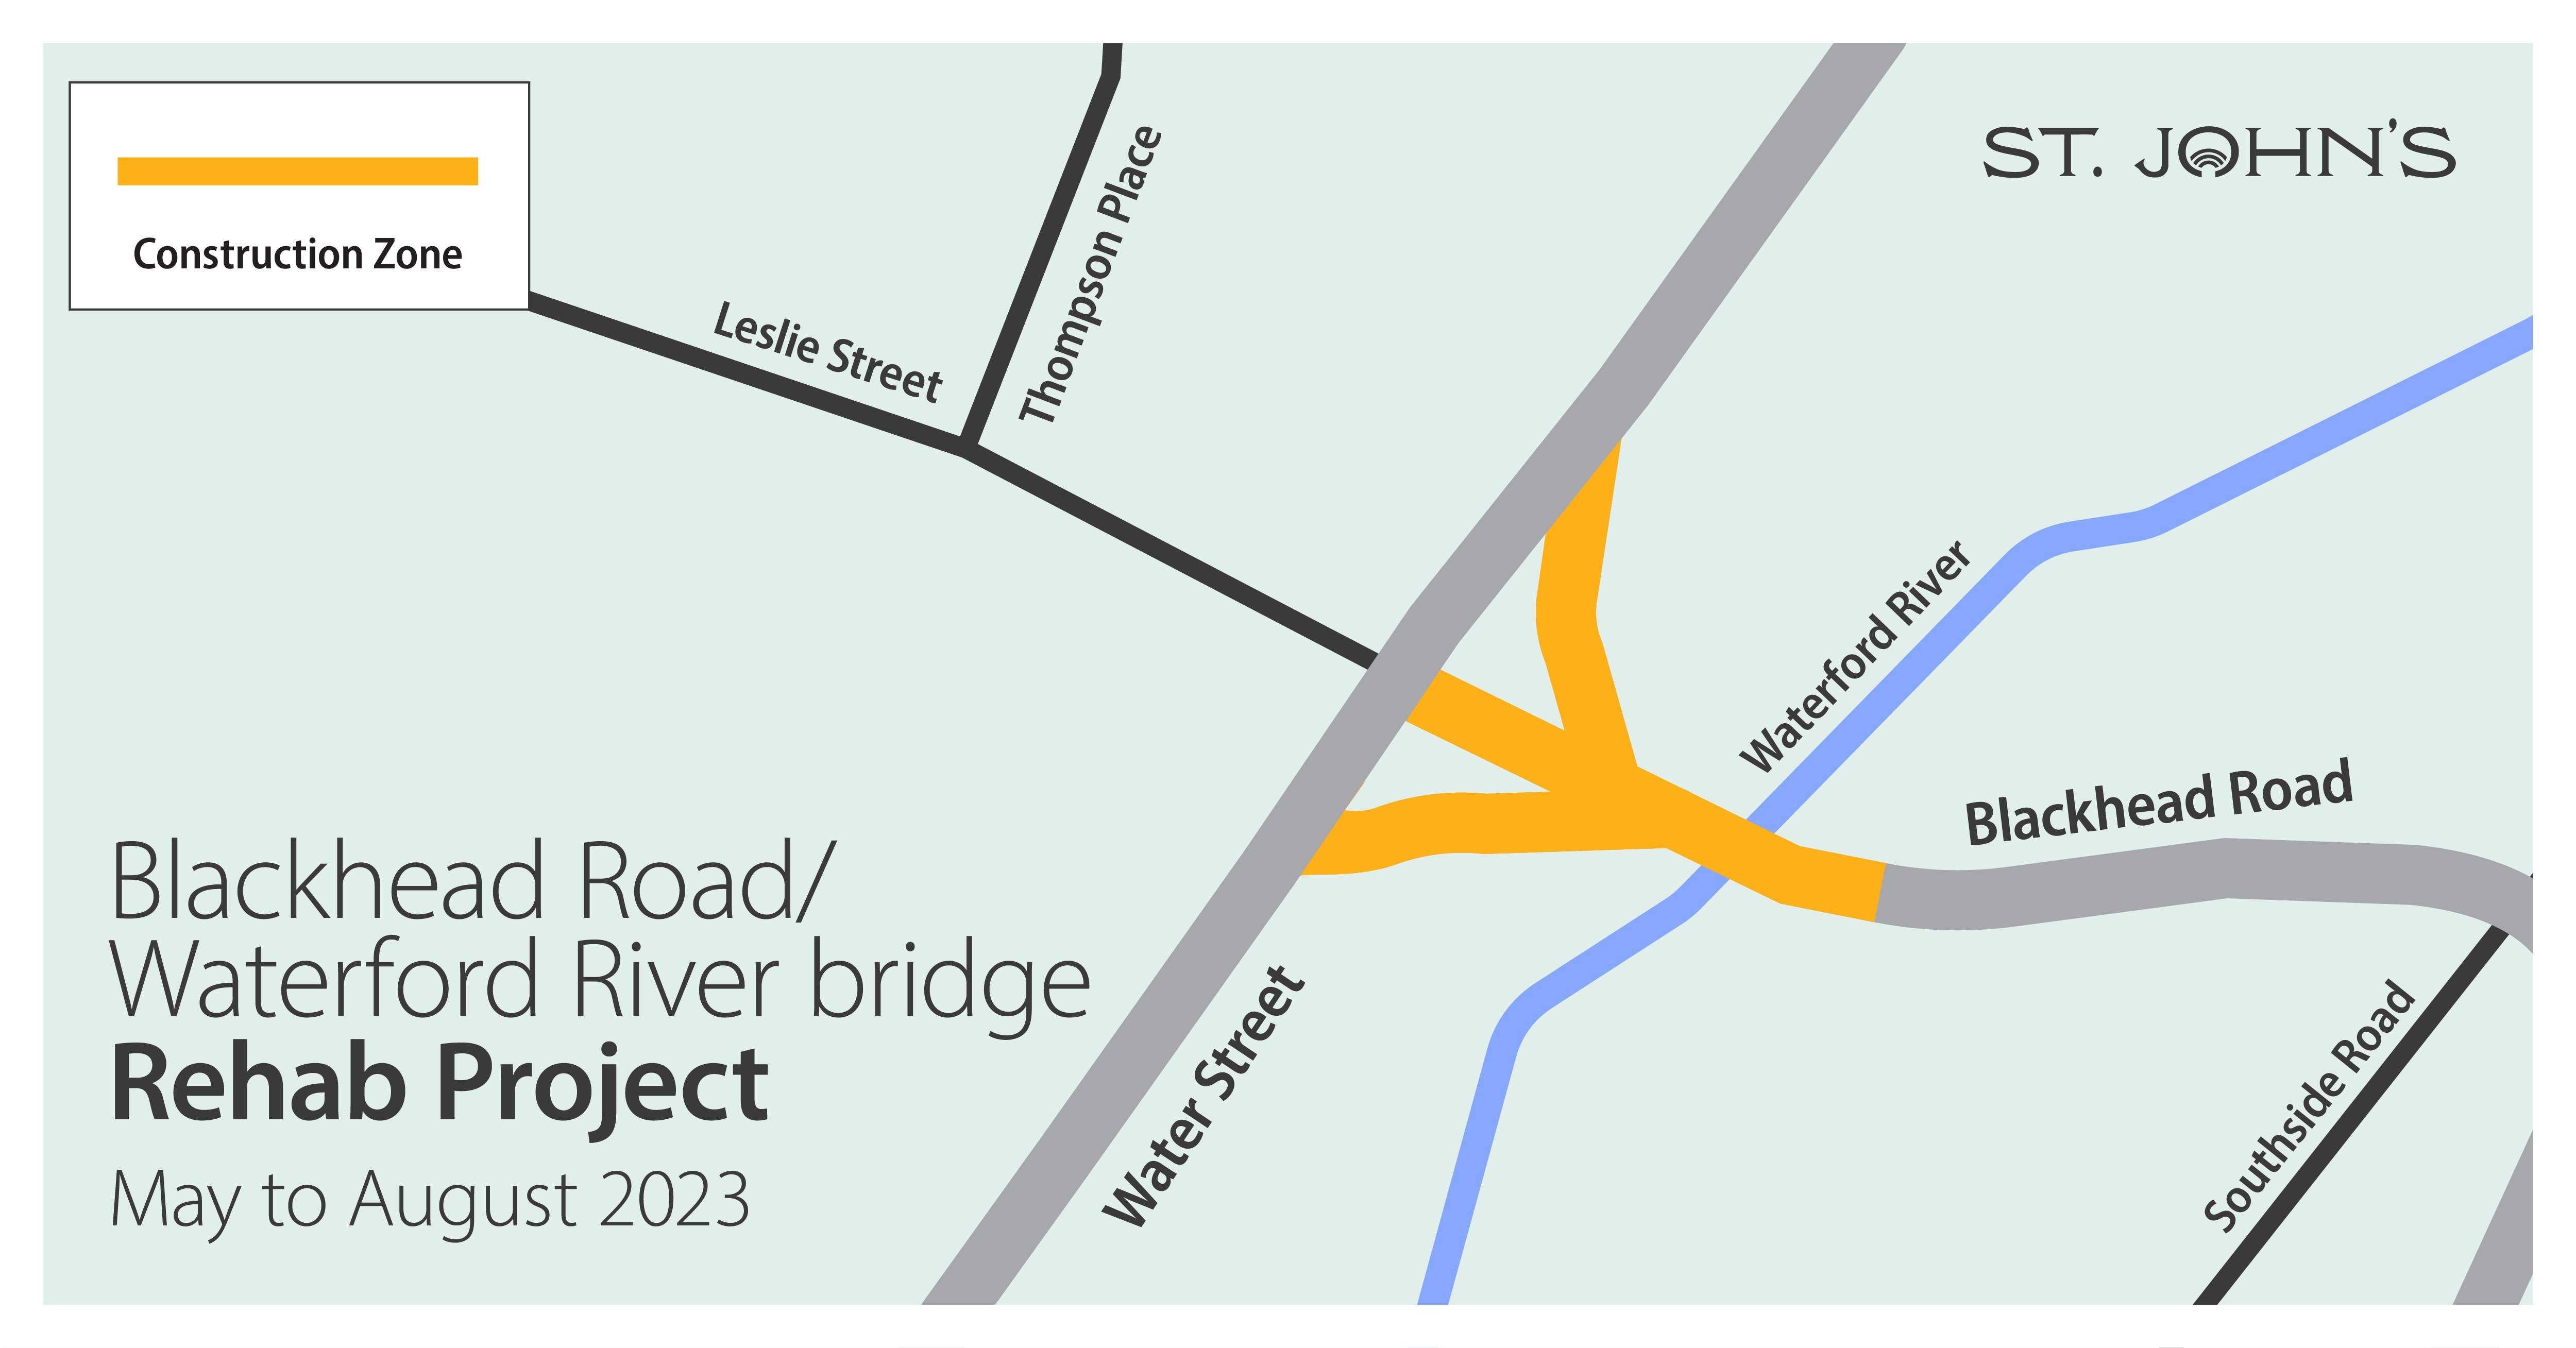 A map of a bridge and surrounding streets, showing the location of a construction project in yellow.